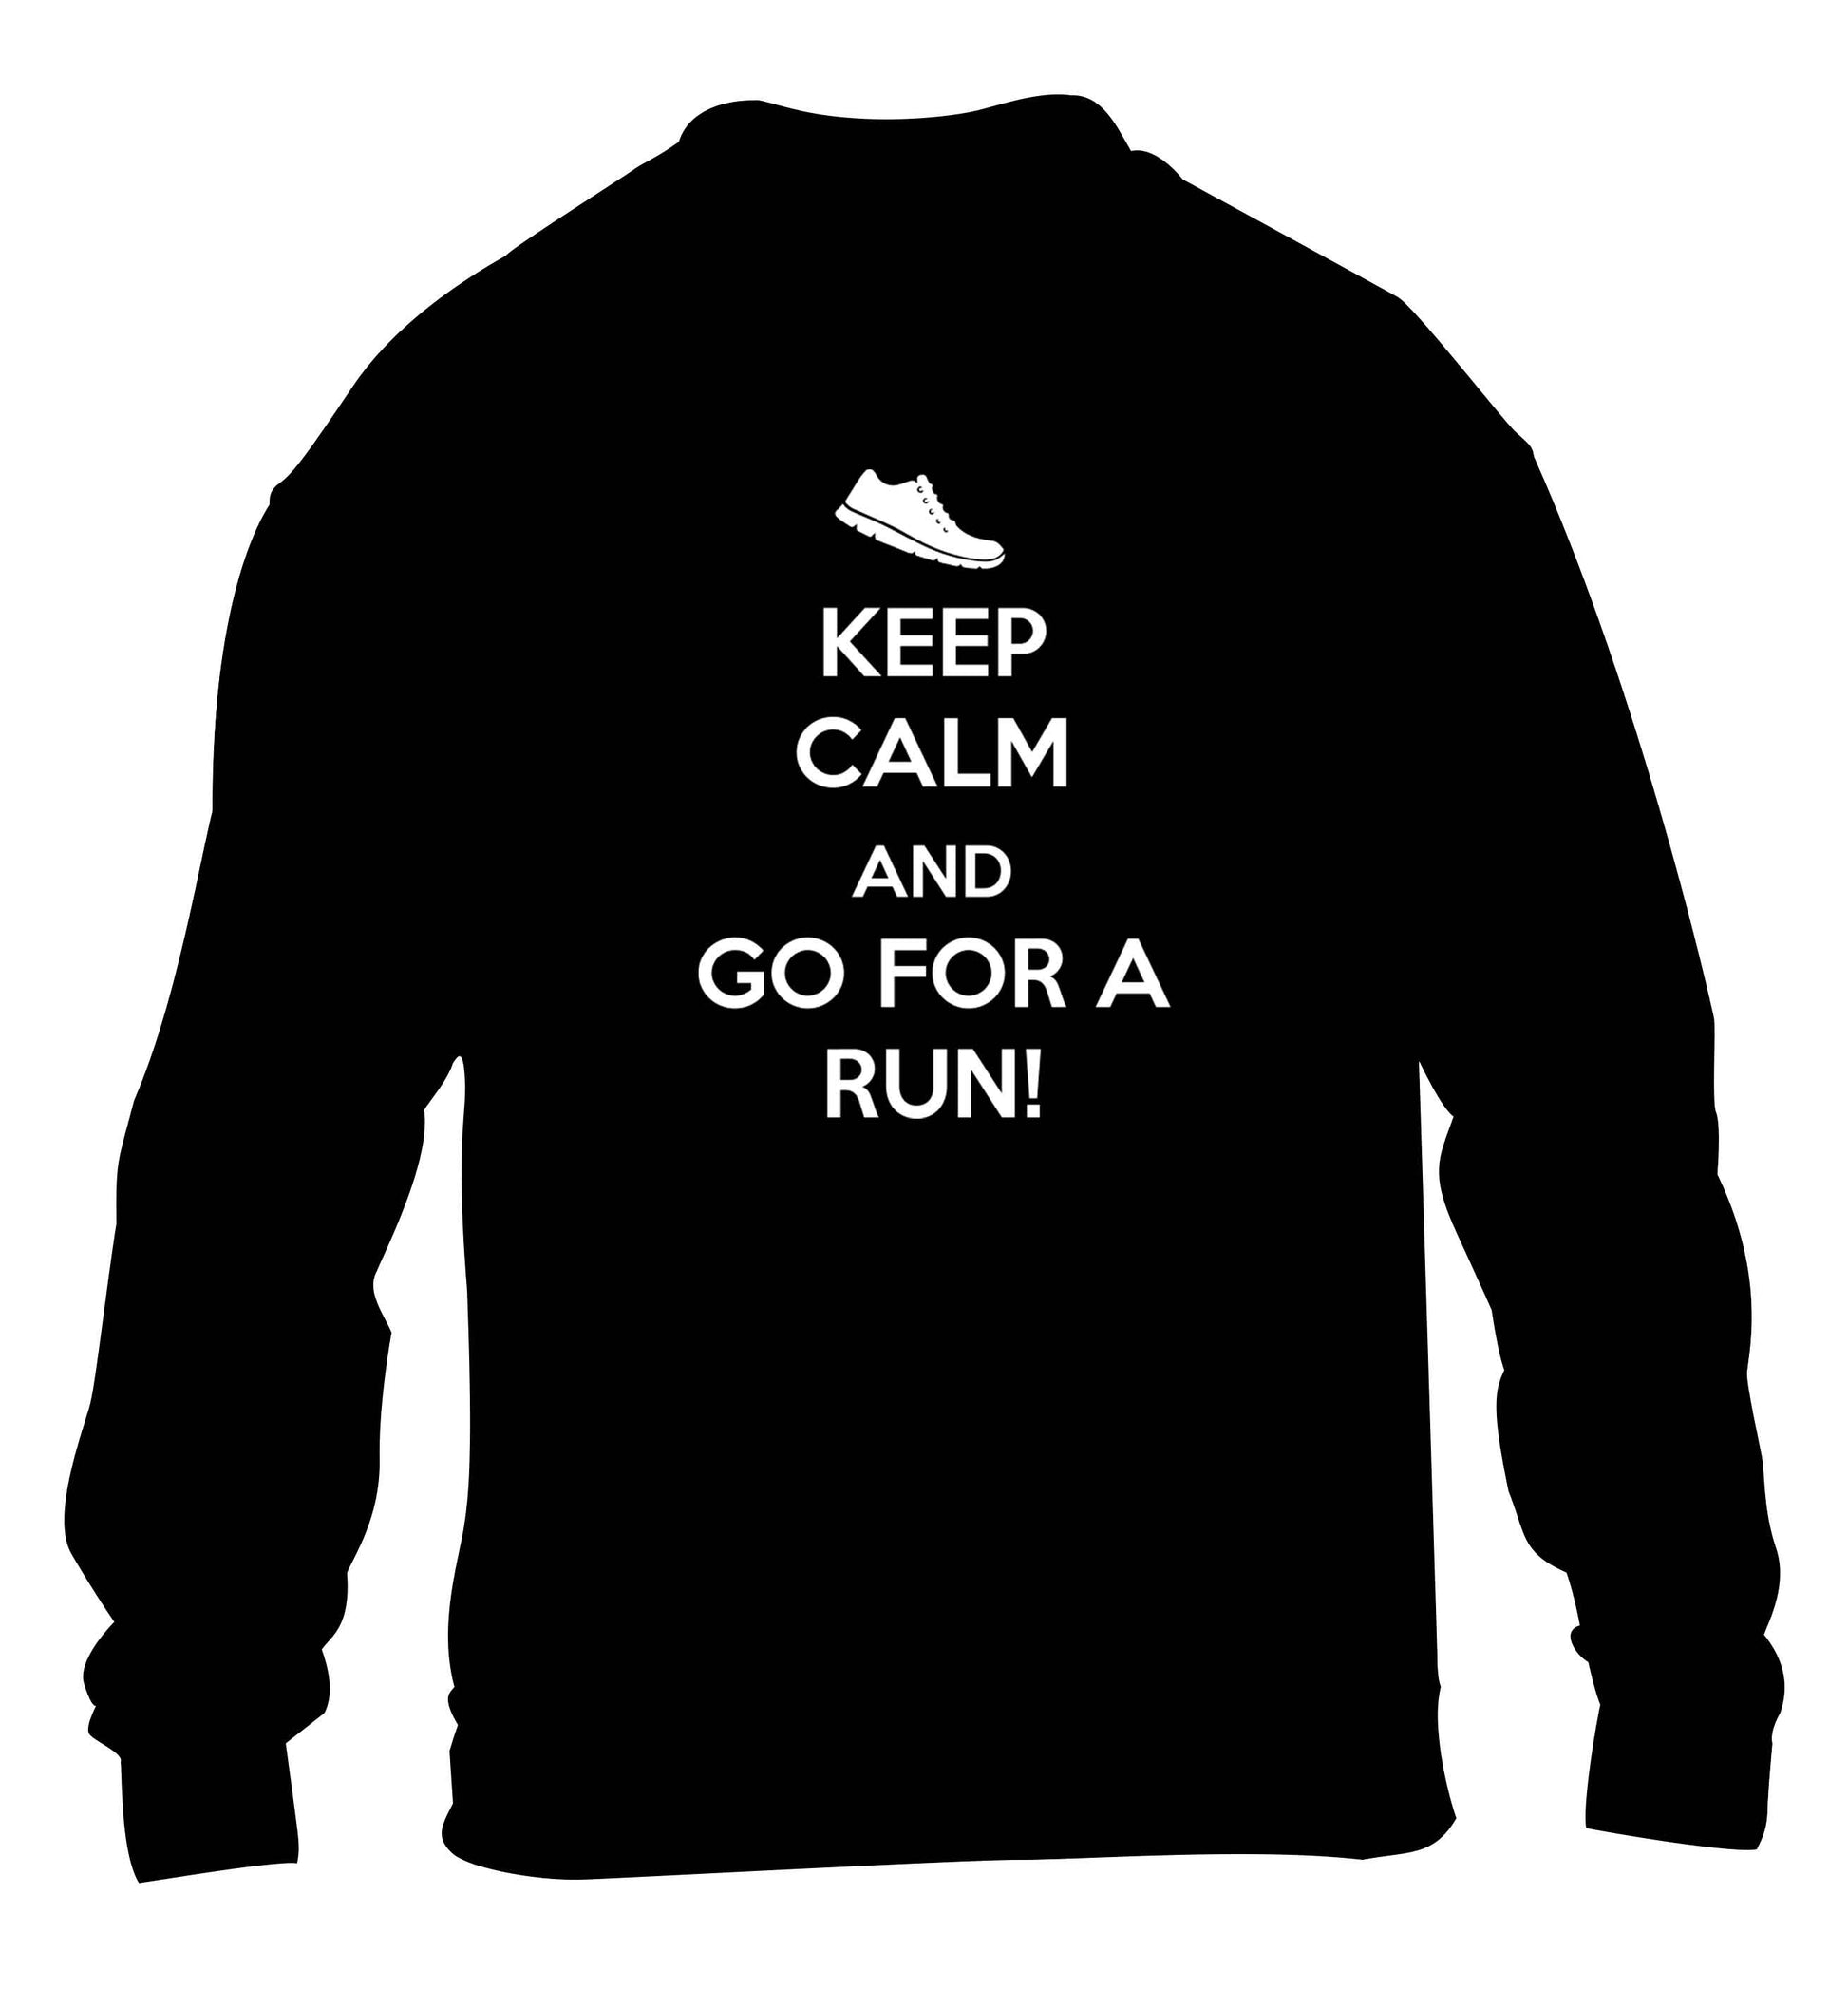 Keep calm and go for a run children's black sweater 12-13 Years